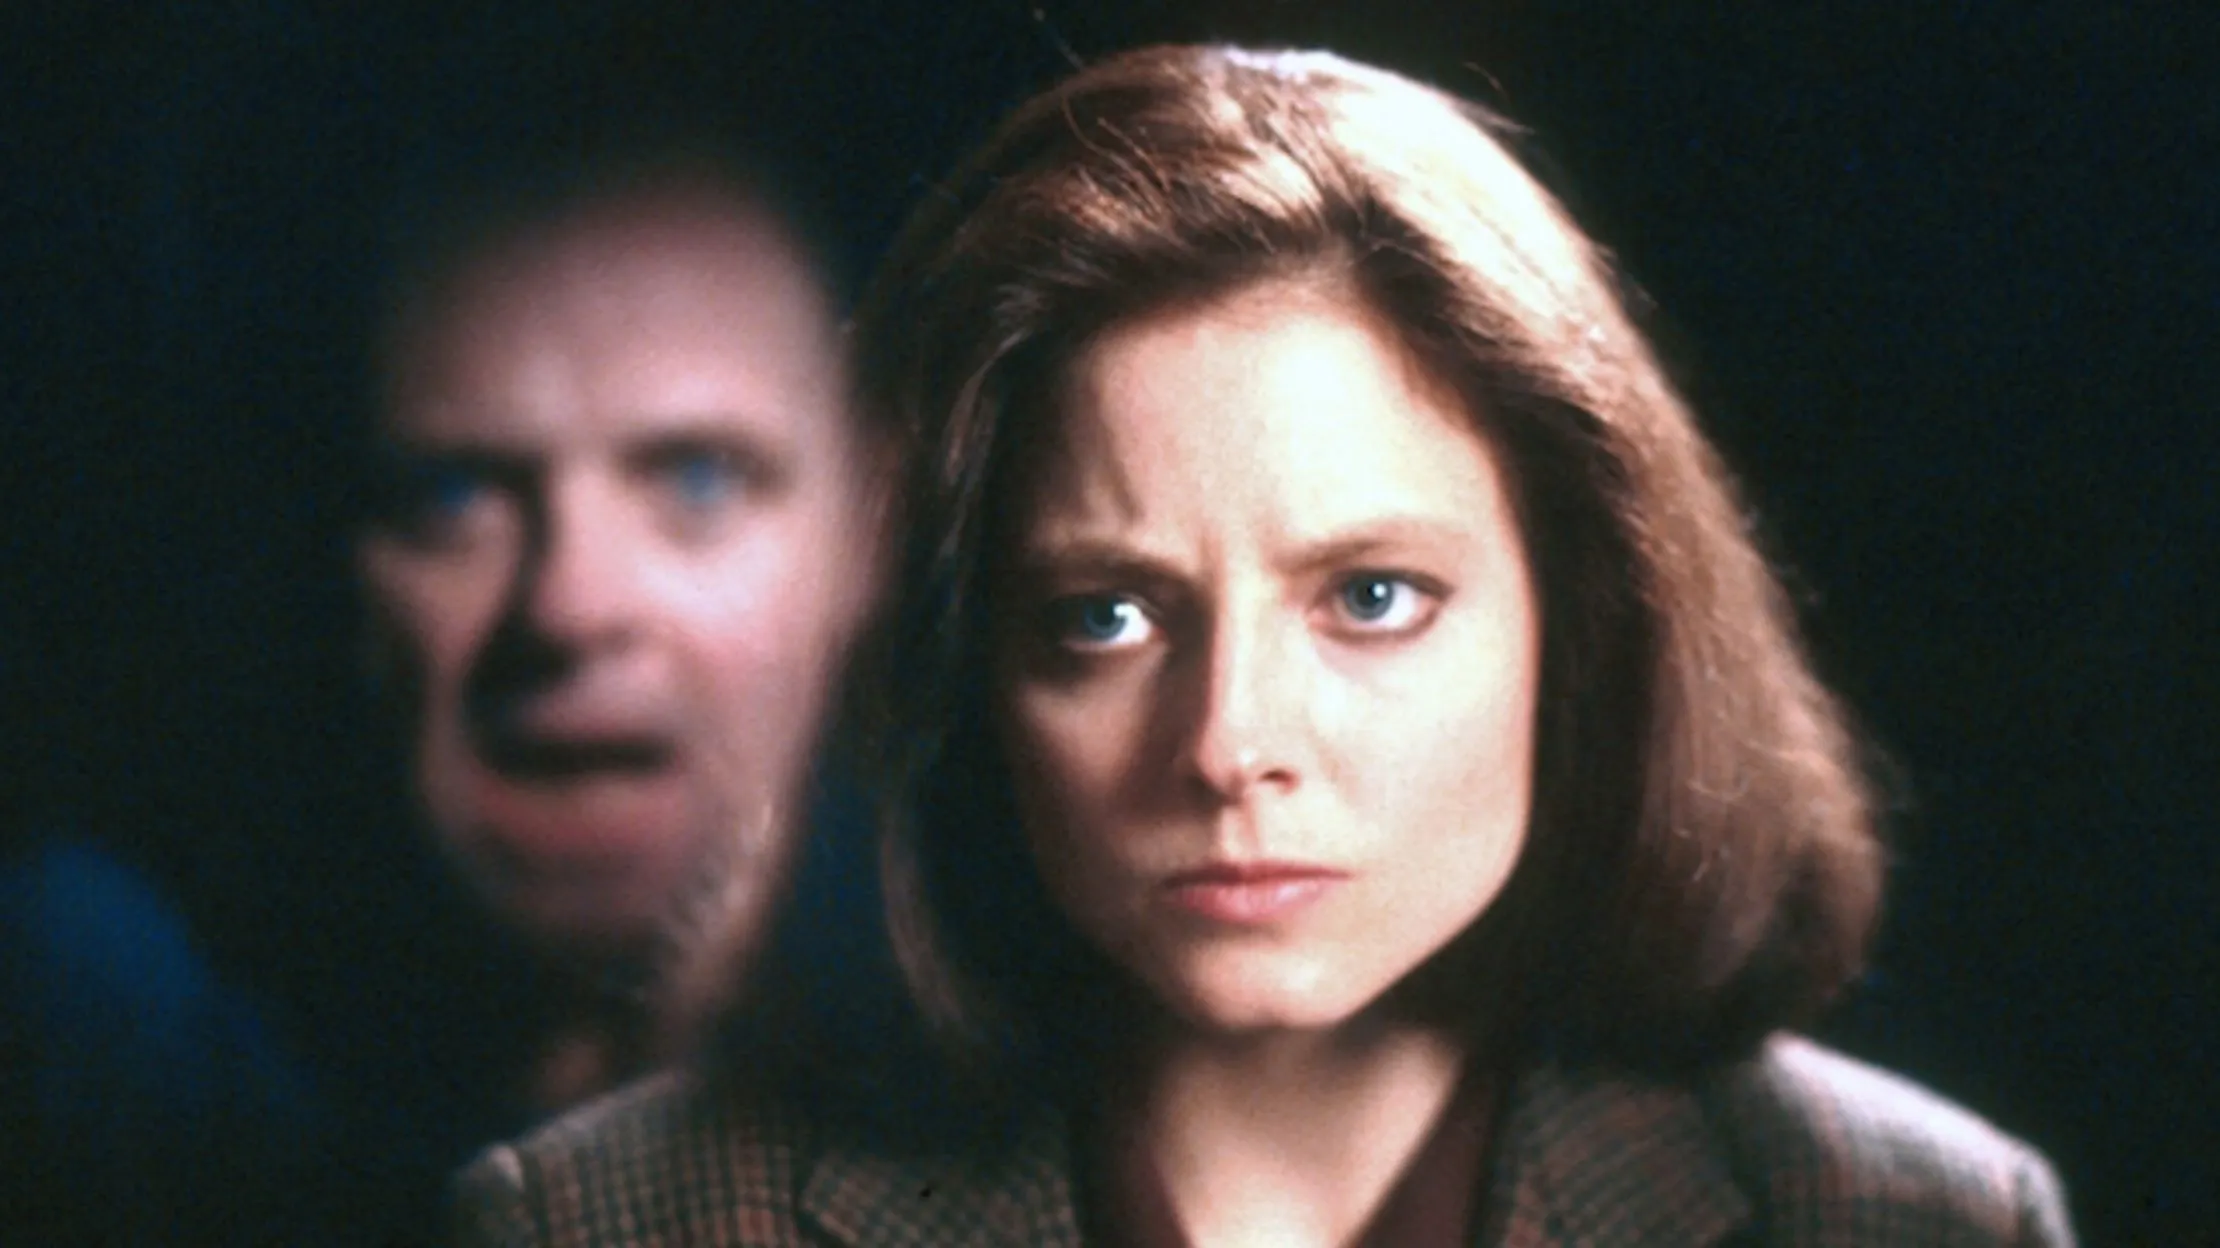 A scene from The Silence of the Lambs